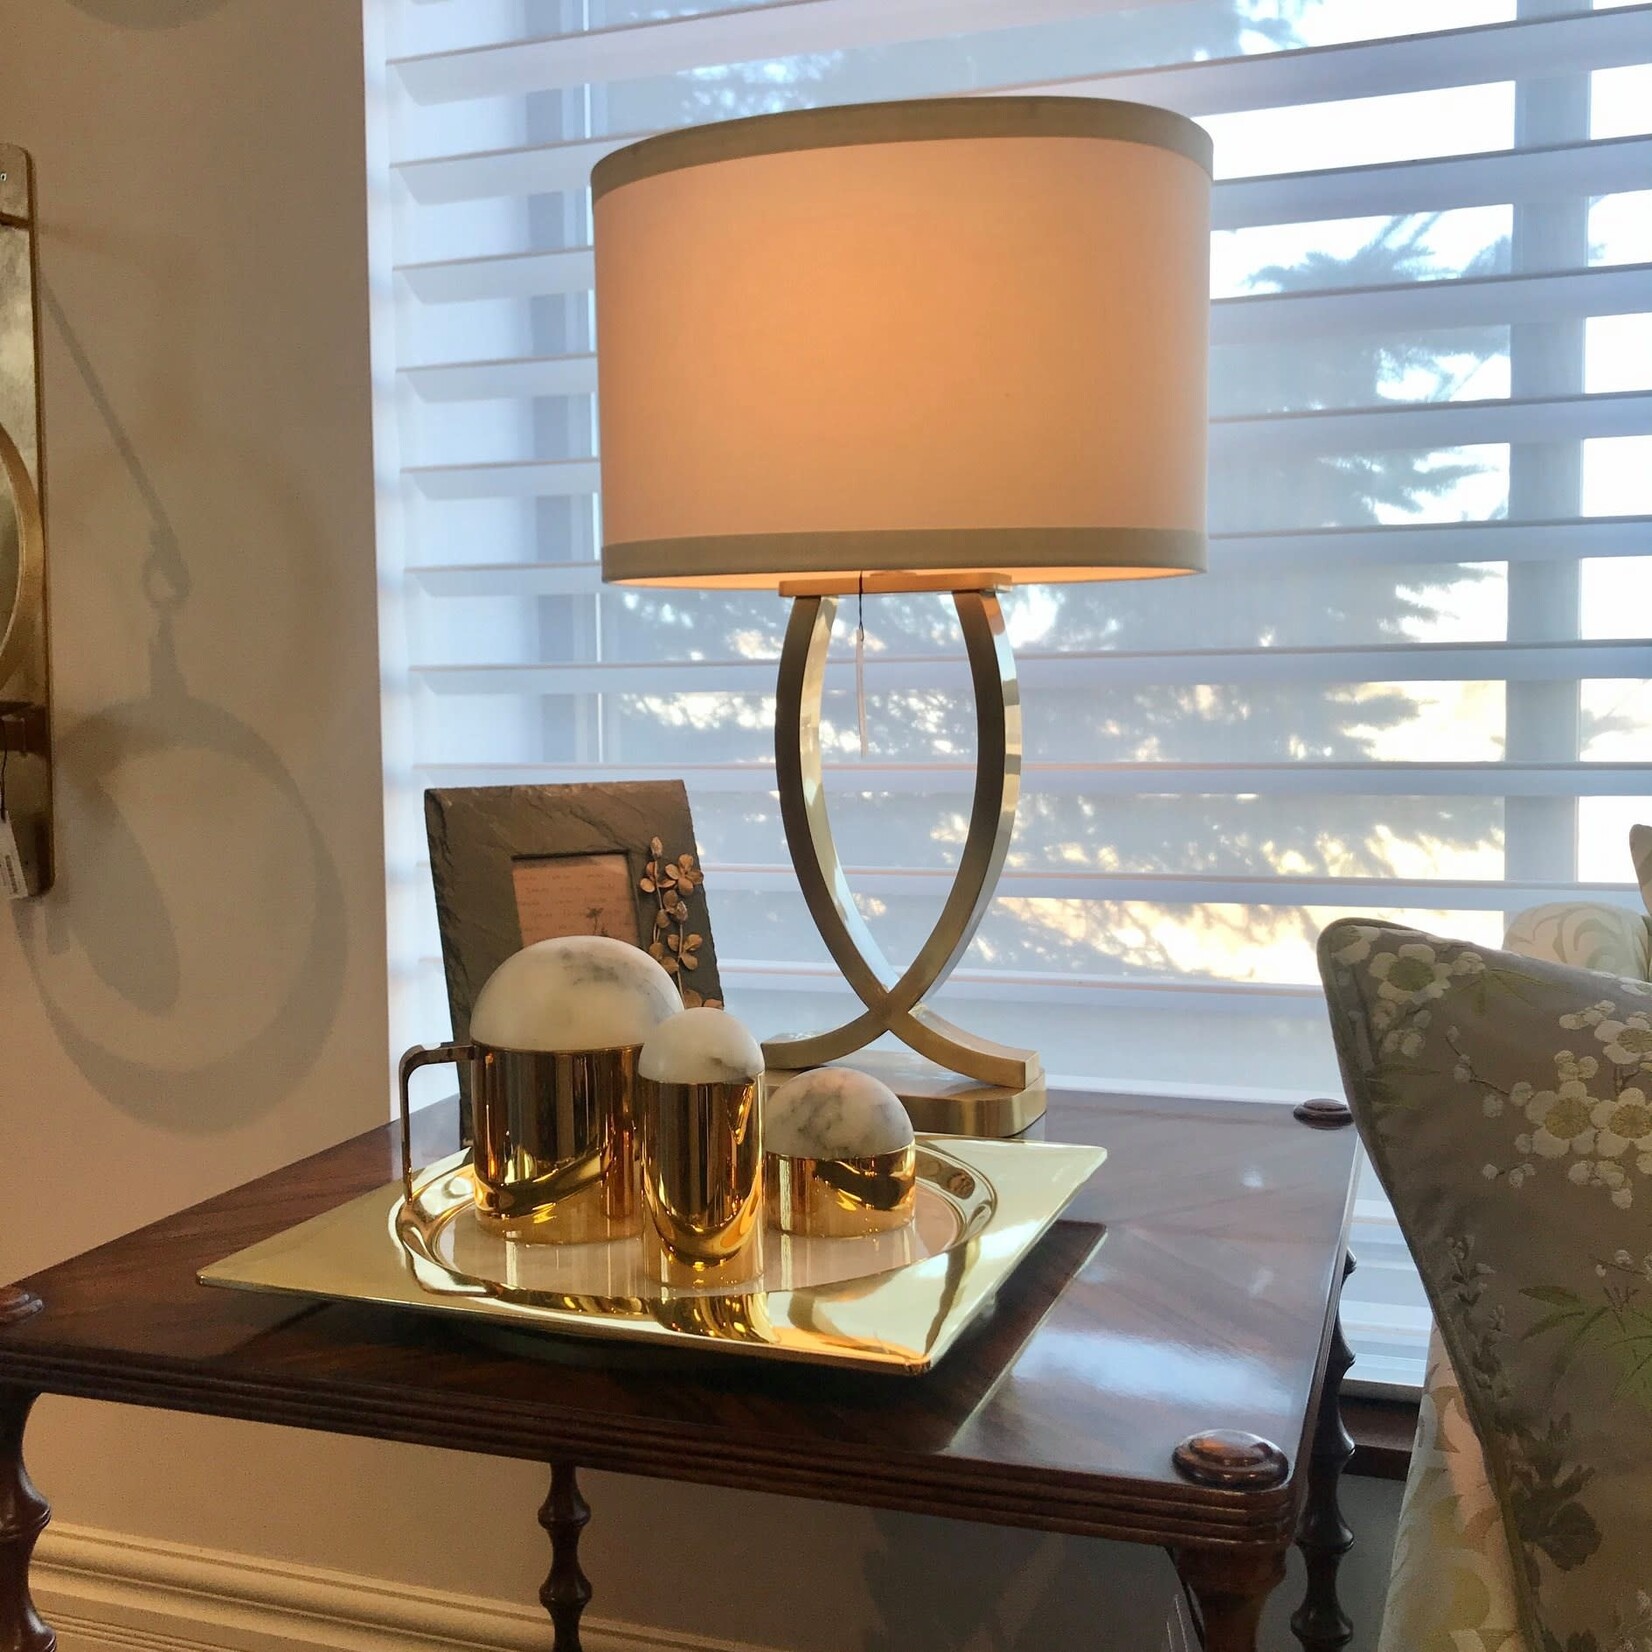 Wildwood Arches Table Lamp